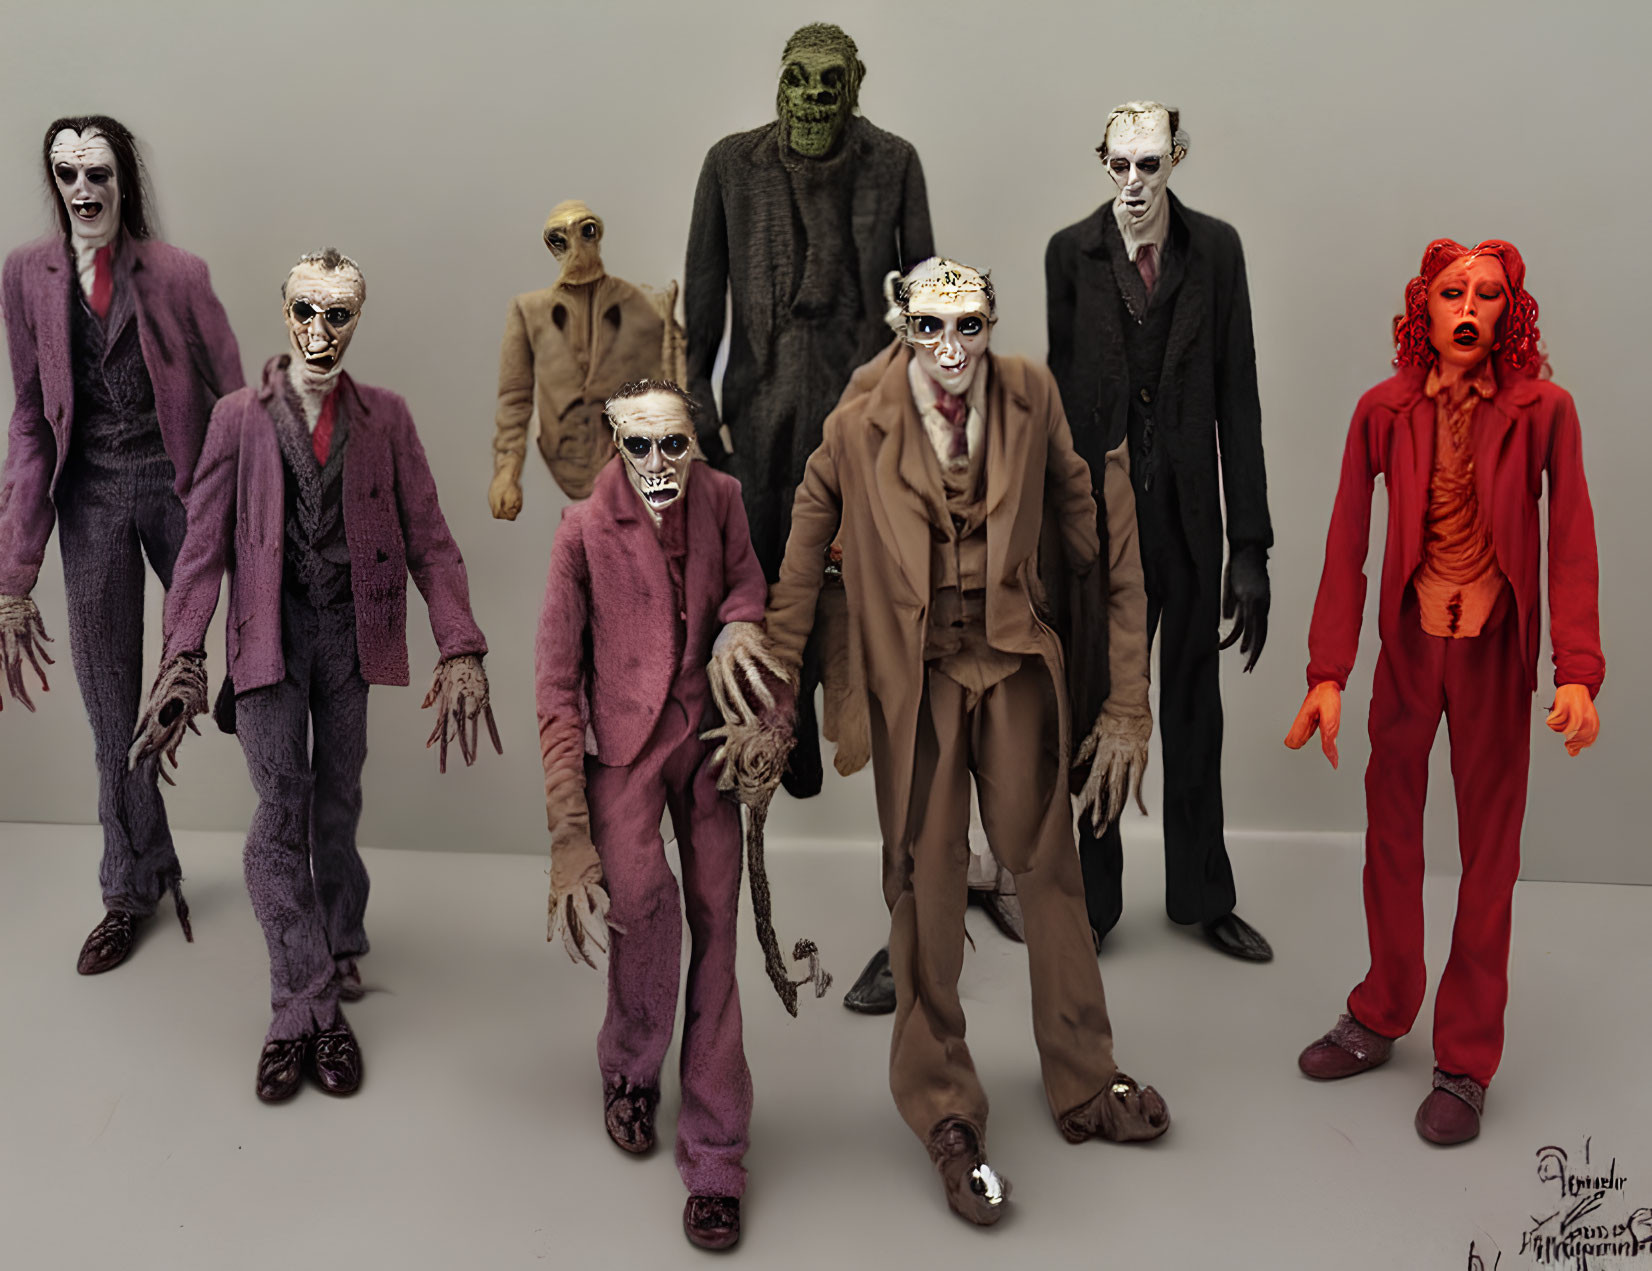 Detailed Zombie Figurines in Suits Displayed Against Dark Background